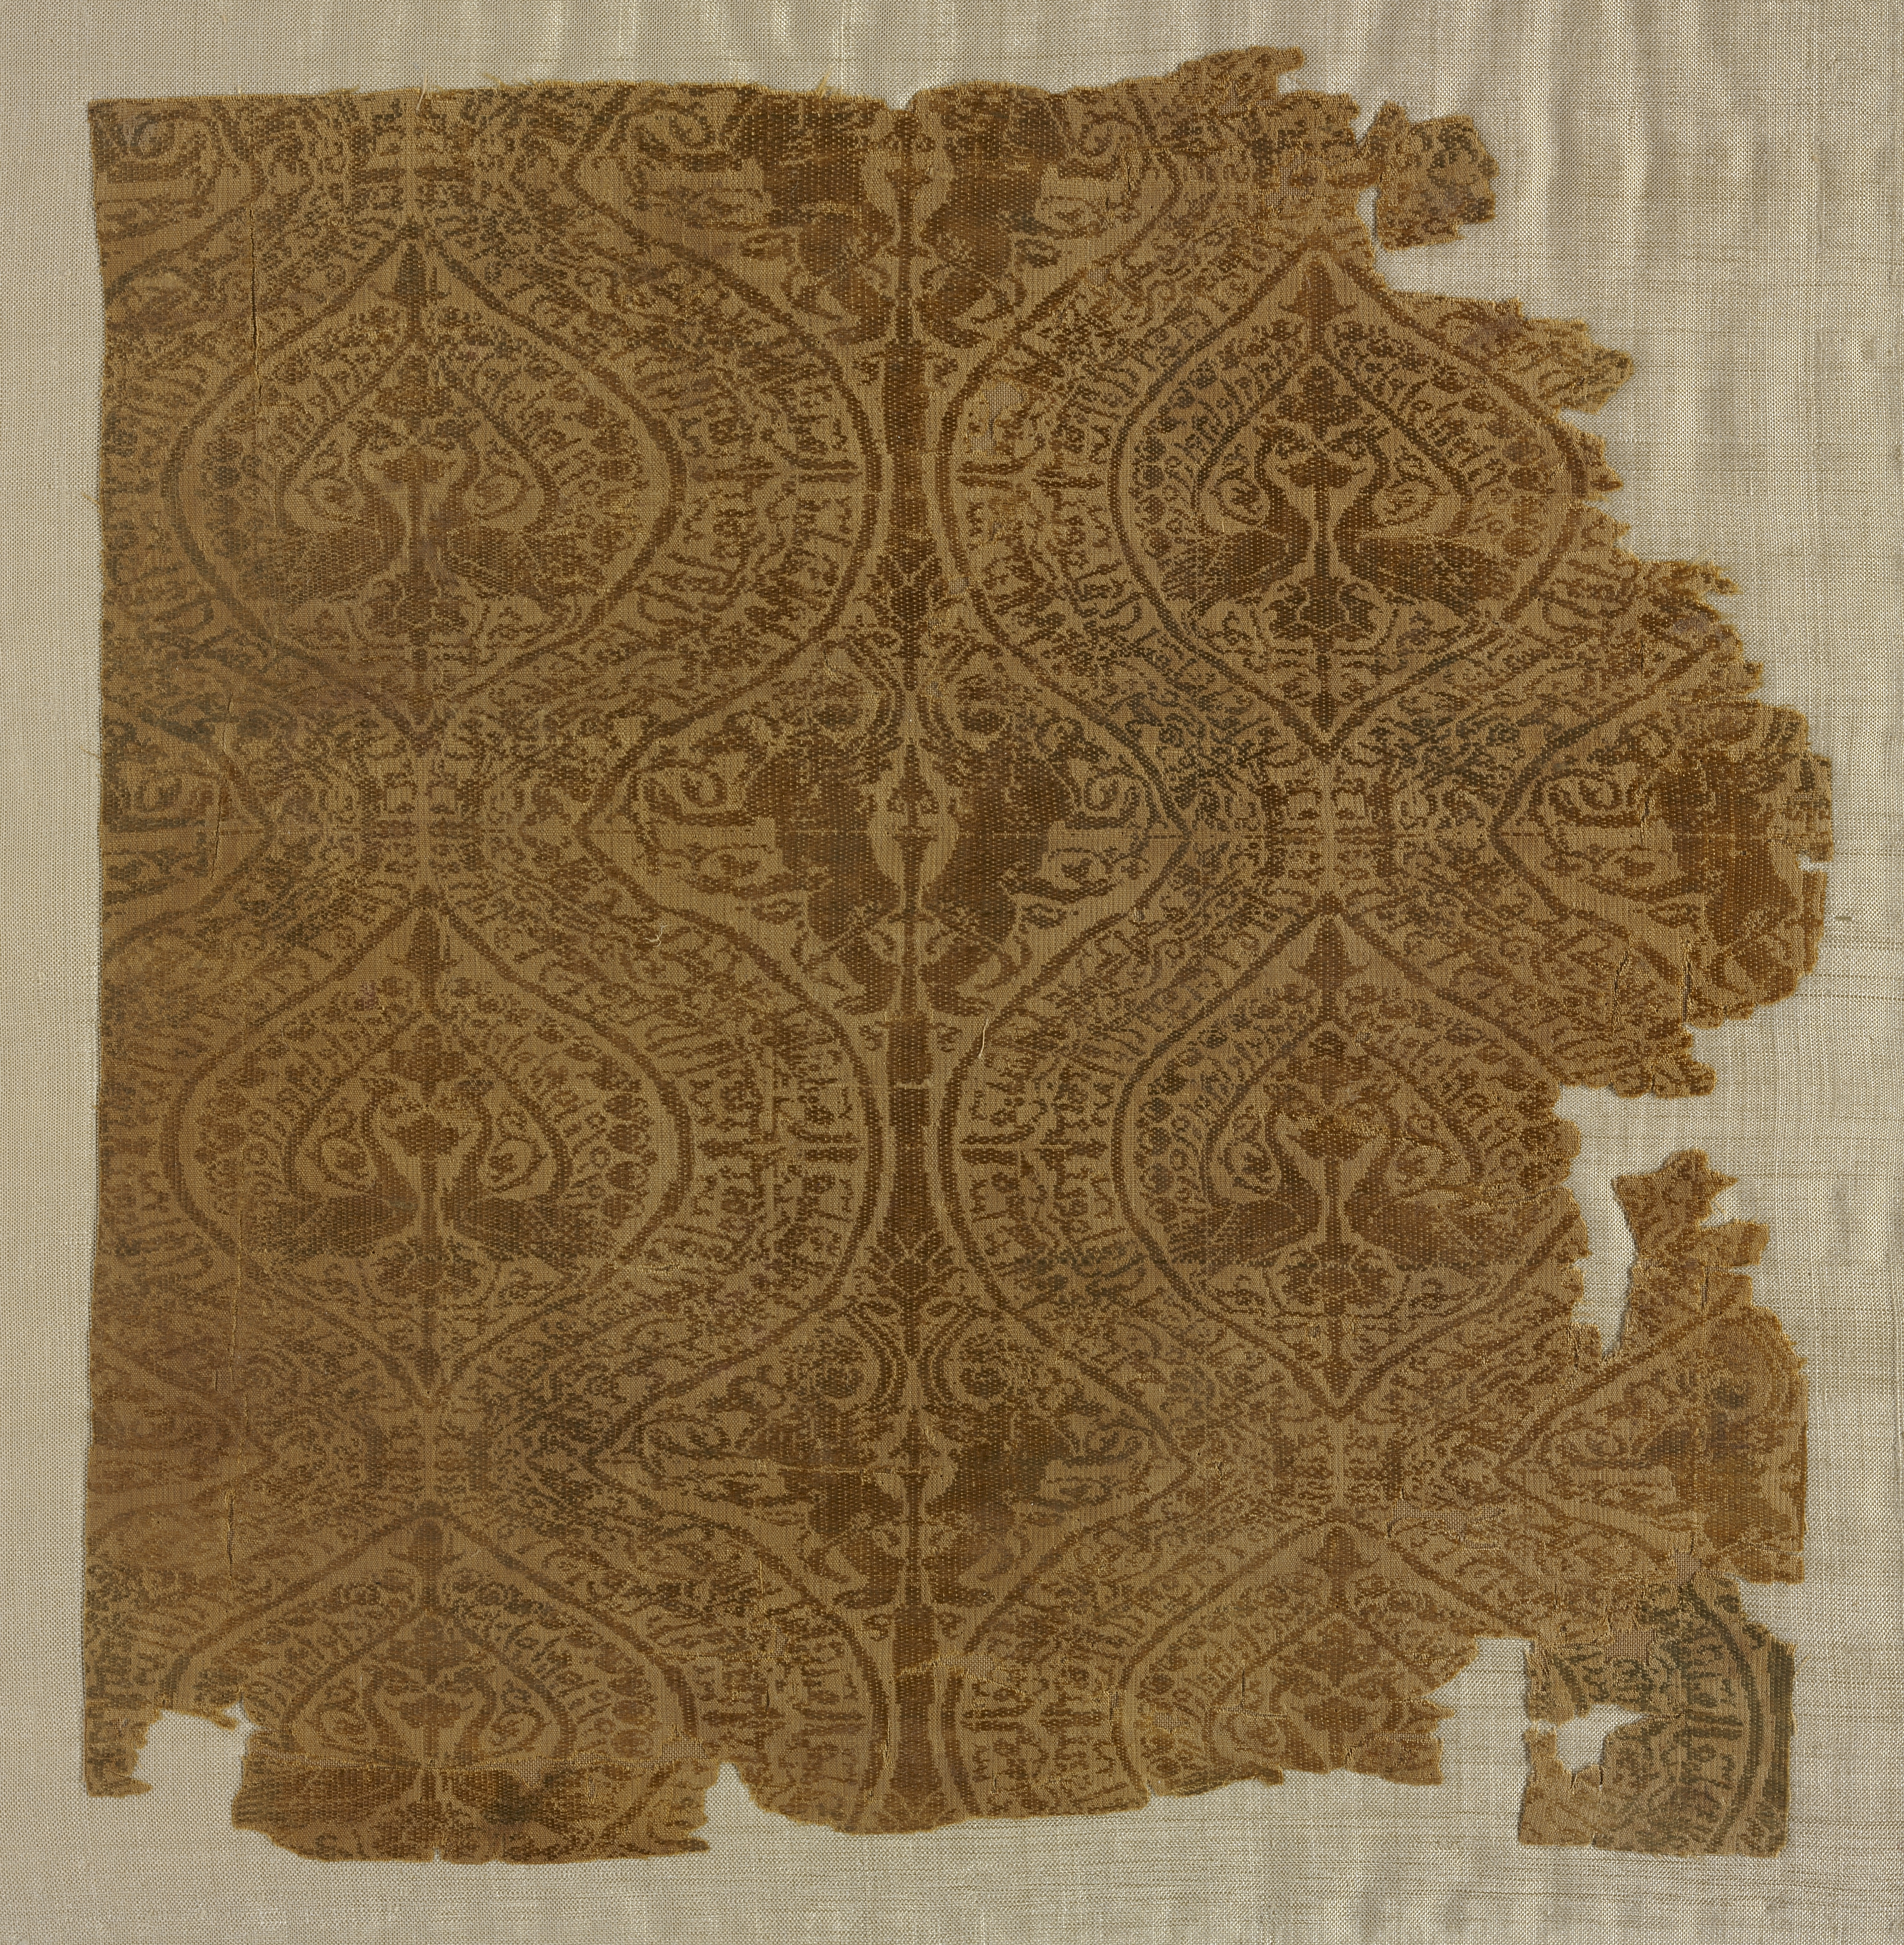 Fragment with peacocks in ogival pattern